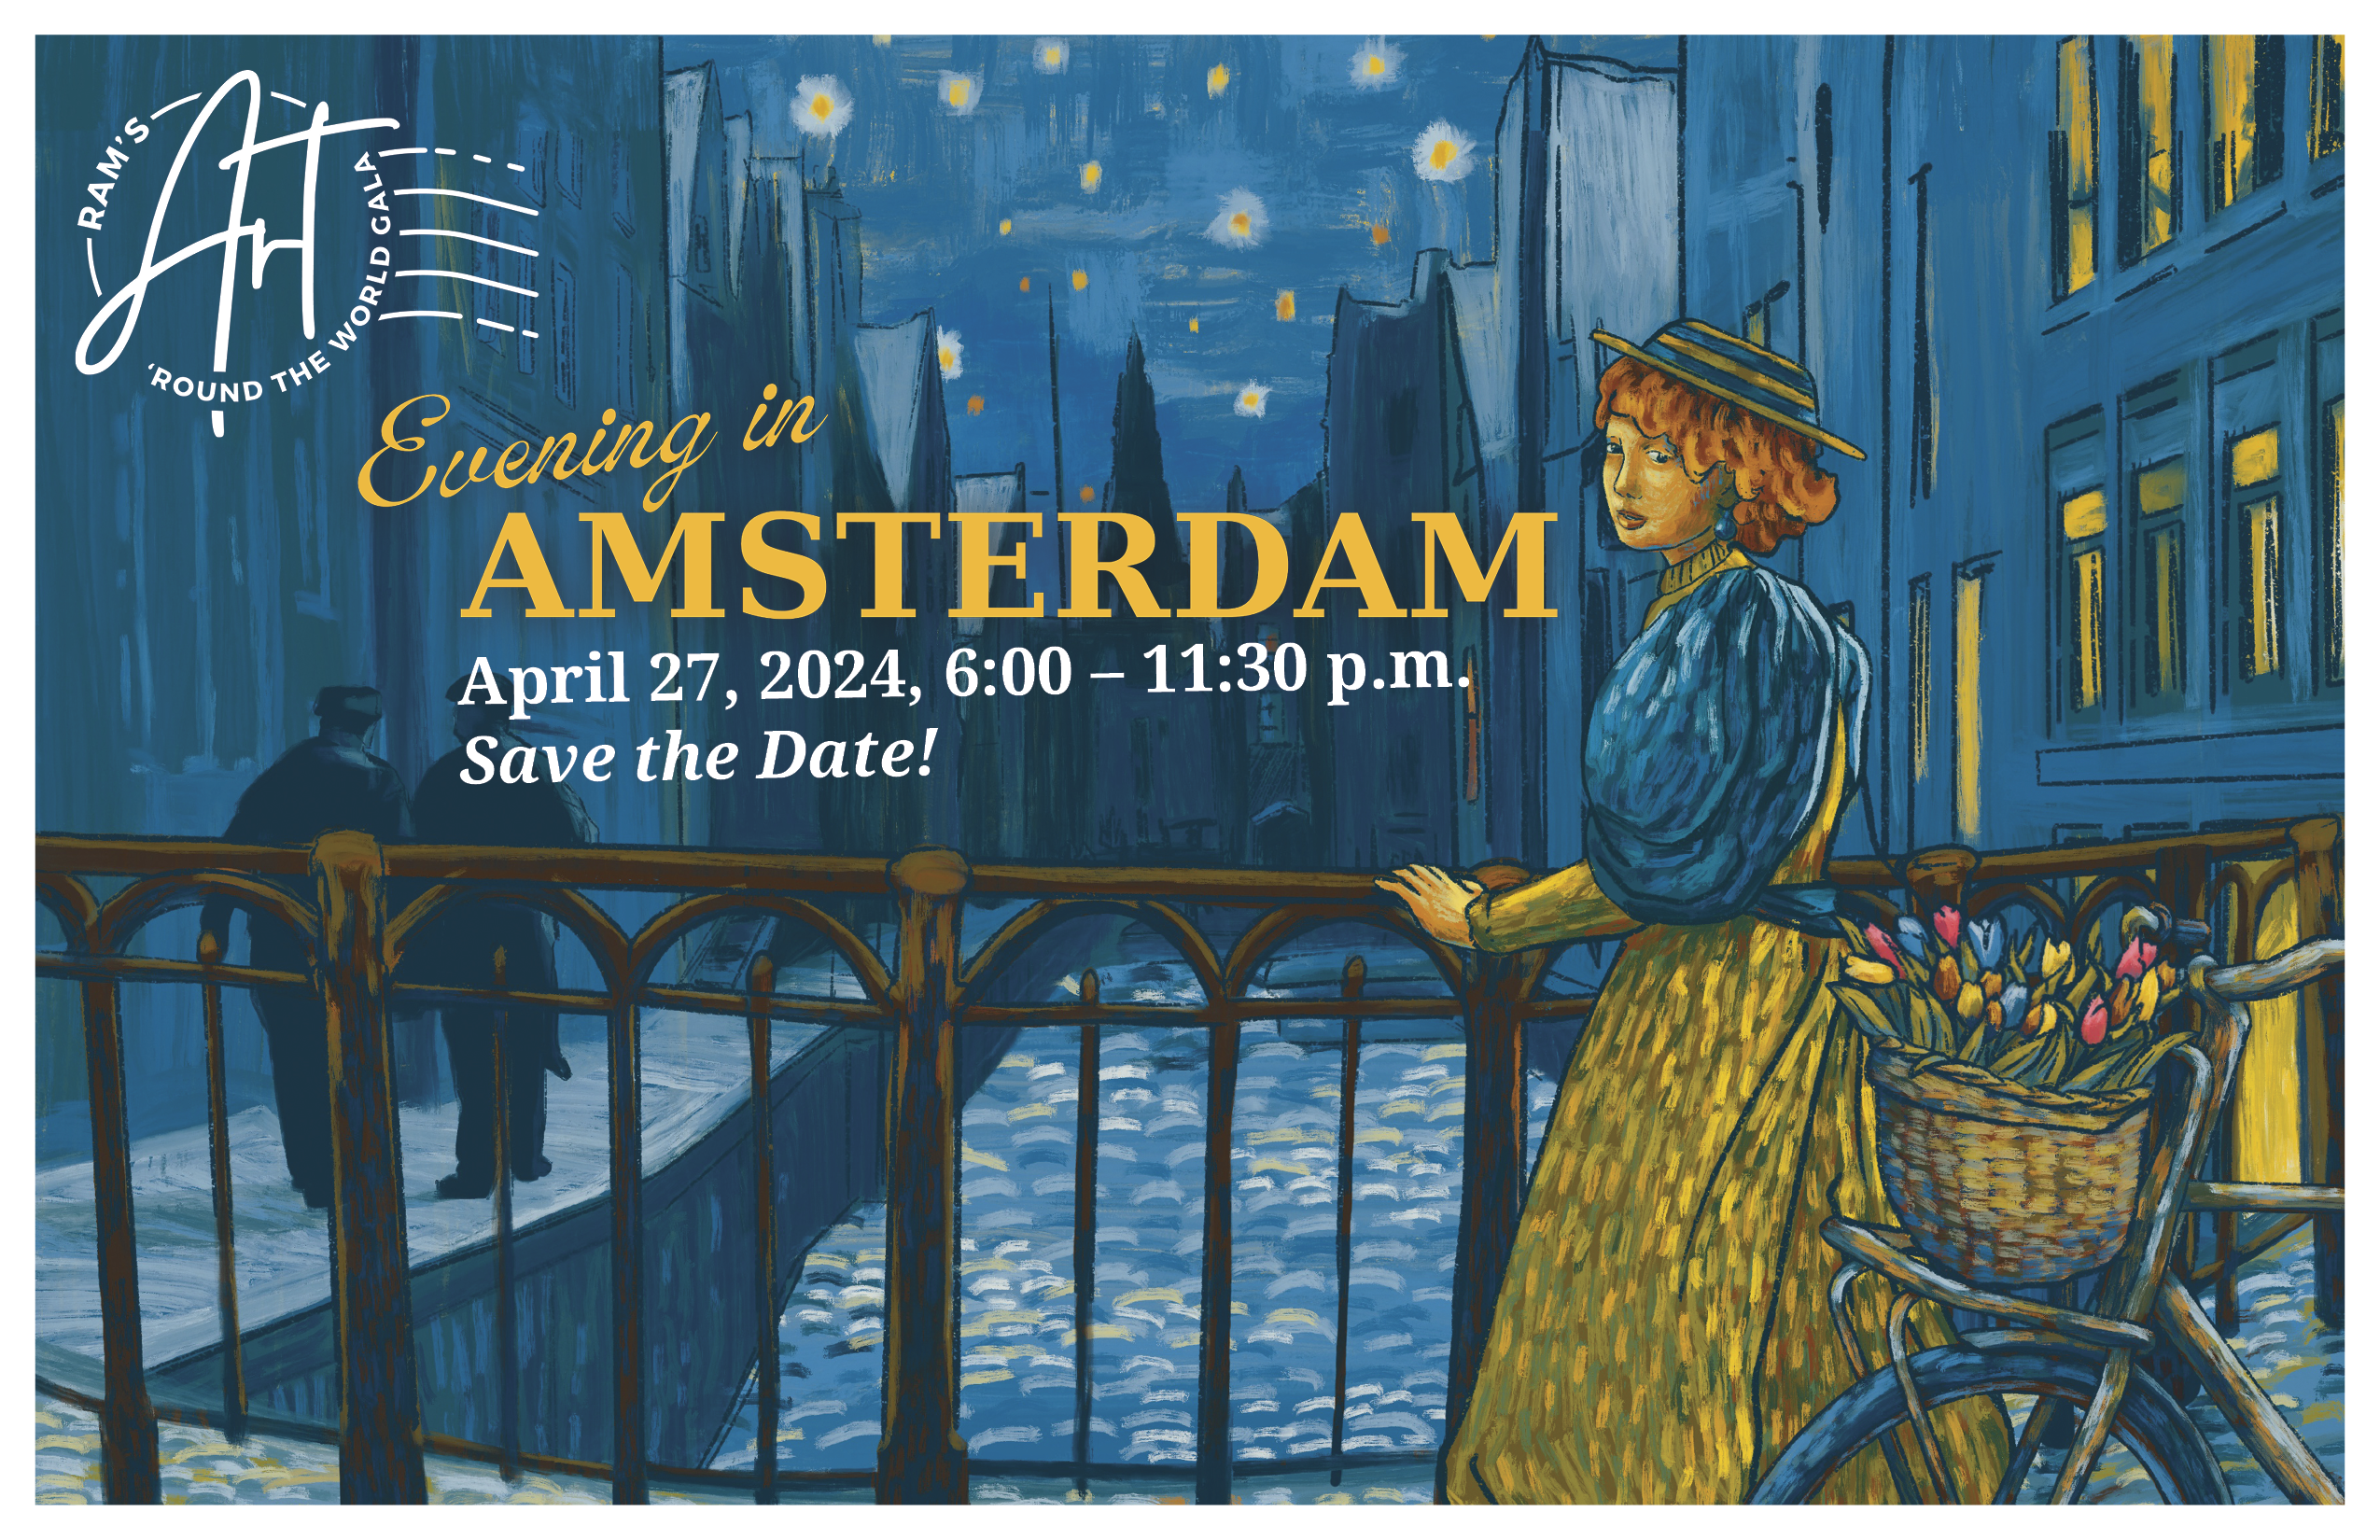 RAM Invited All to “Evening in Amsterdam”